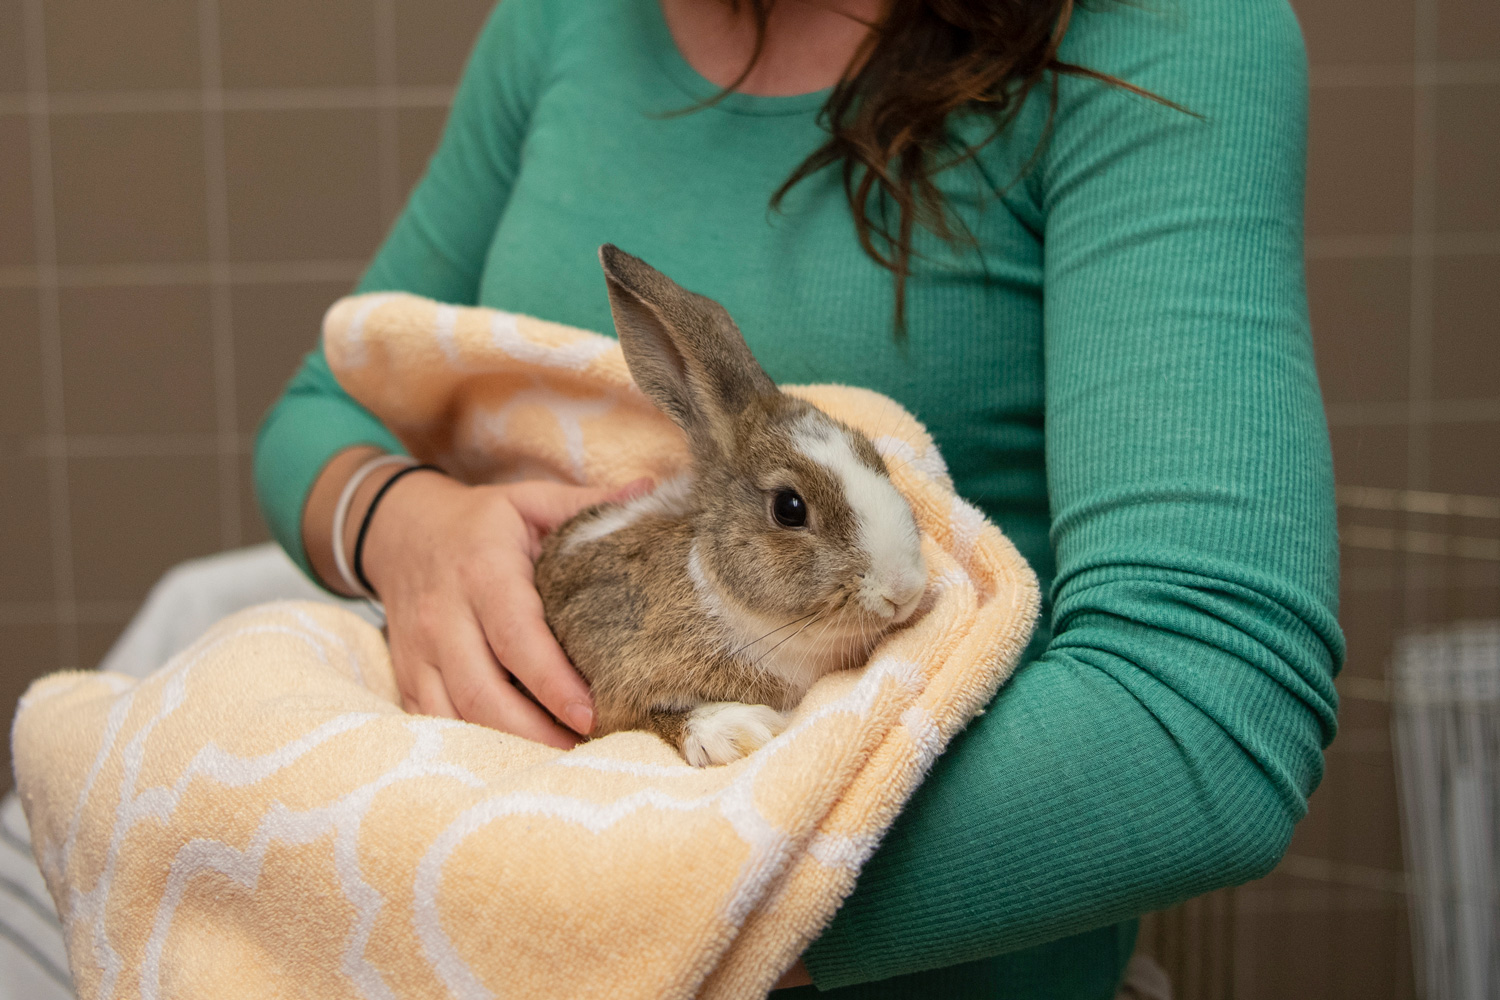 Advocates: Think again before buying an actual bunny for an Easter gift